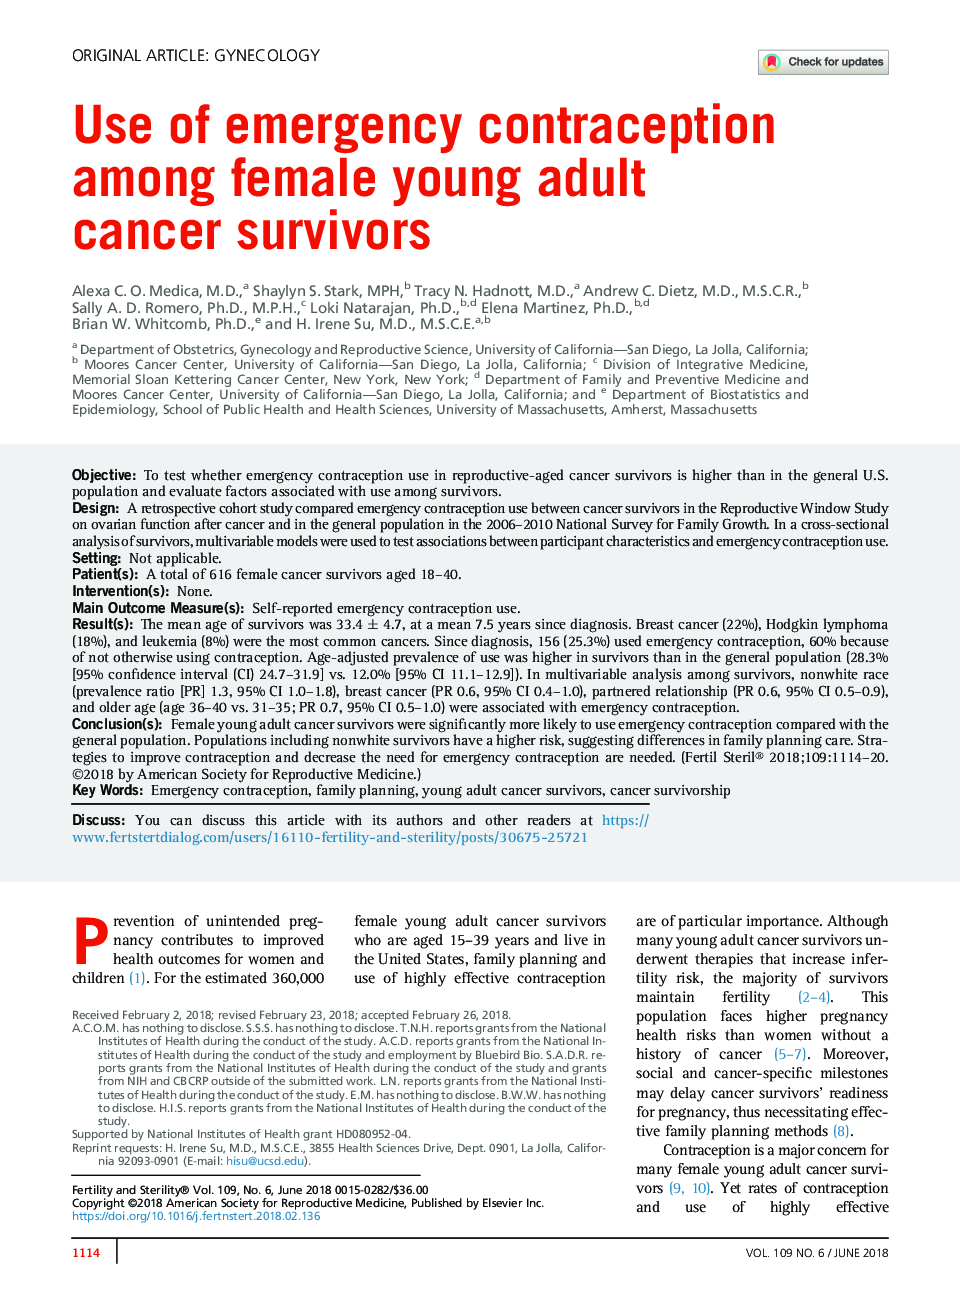 Use of emergency contraception among female young adult cancer survivors